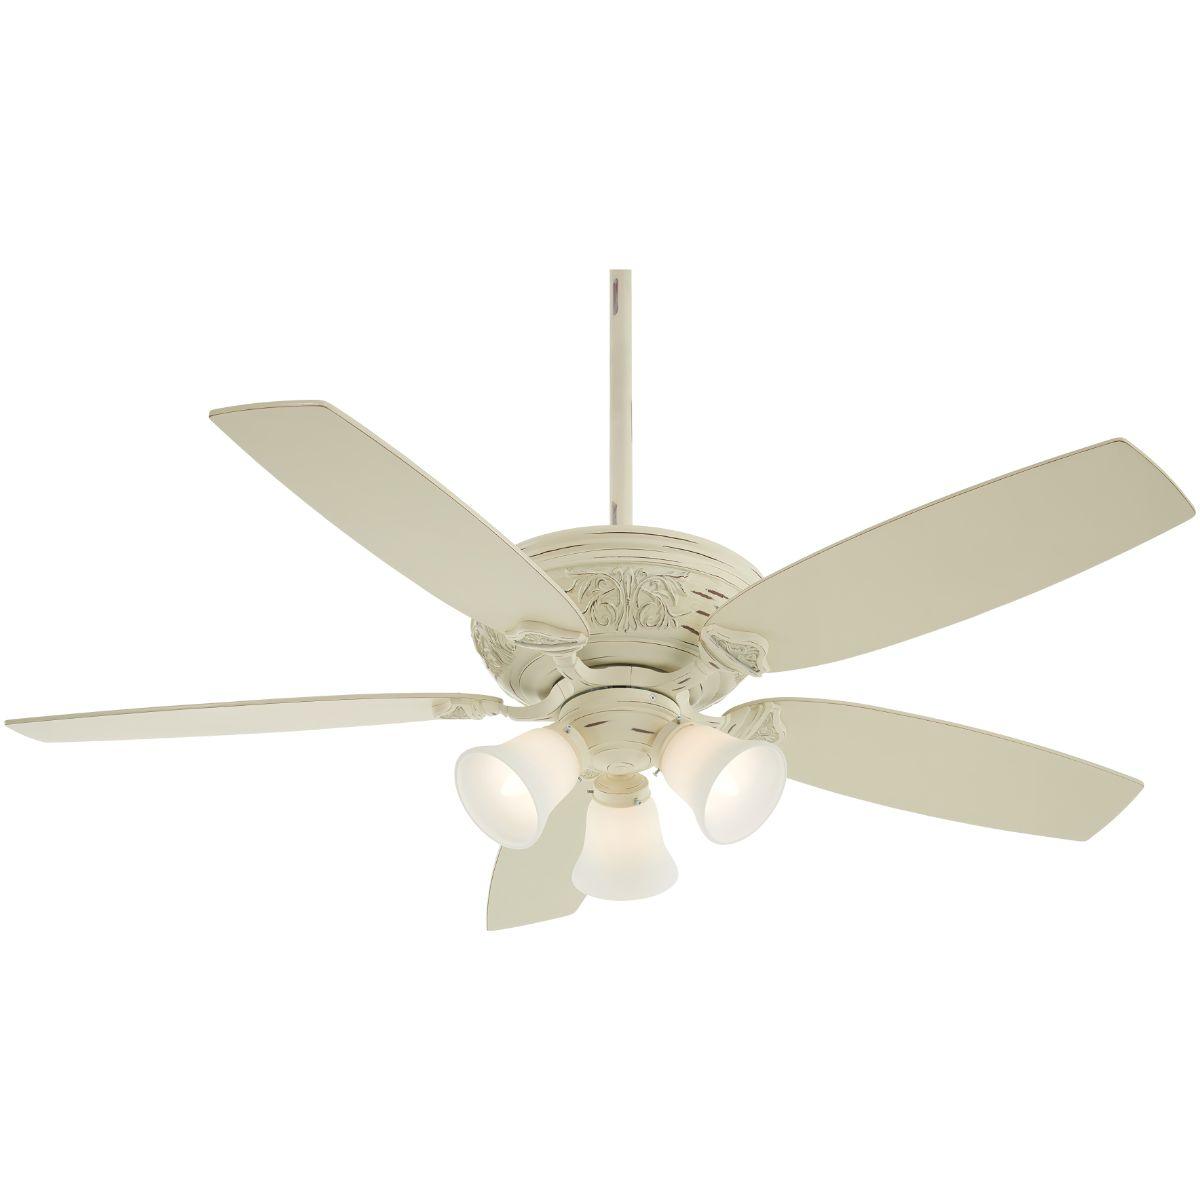 Classica 54 Inch Ceiling Fan With Light And Remote, Provencal Blanc Finish